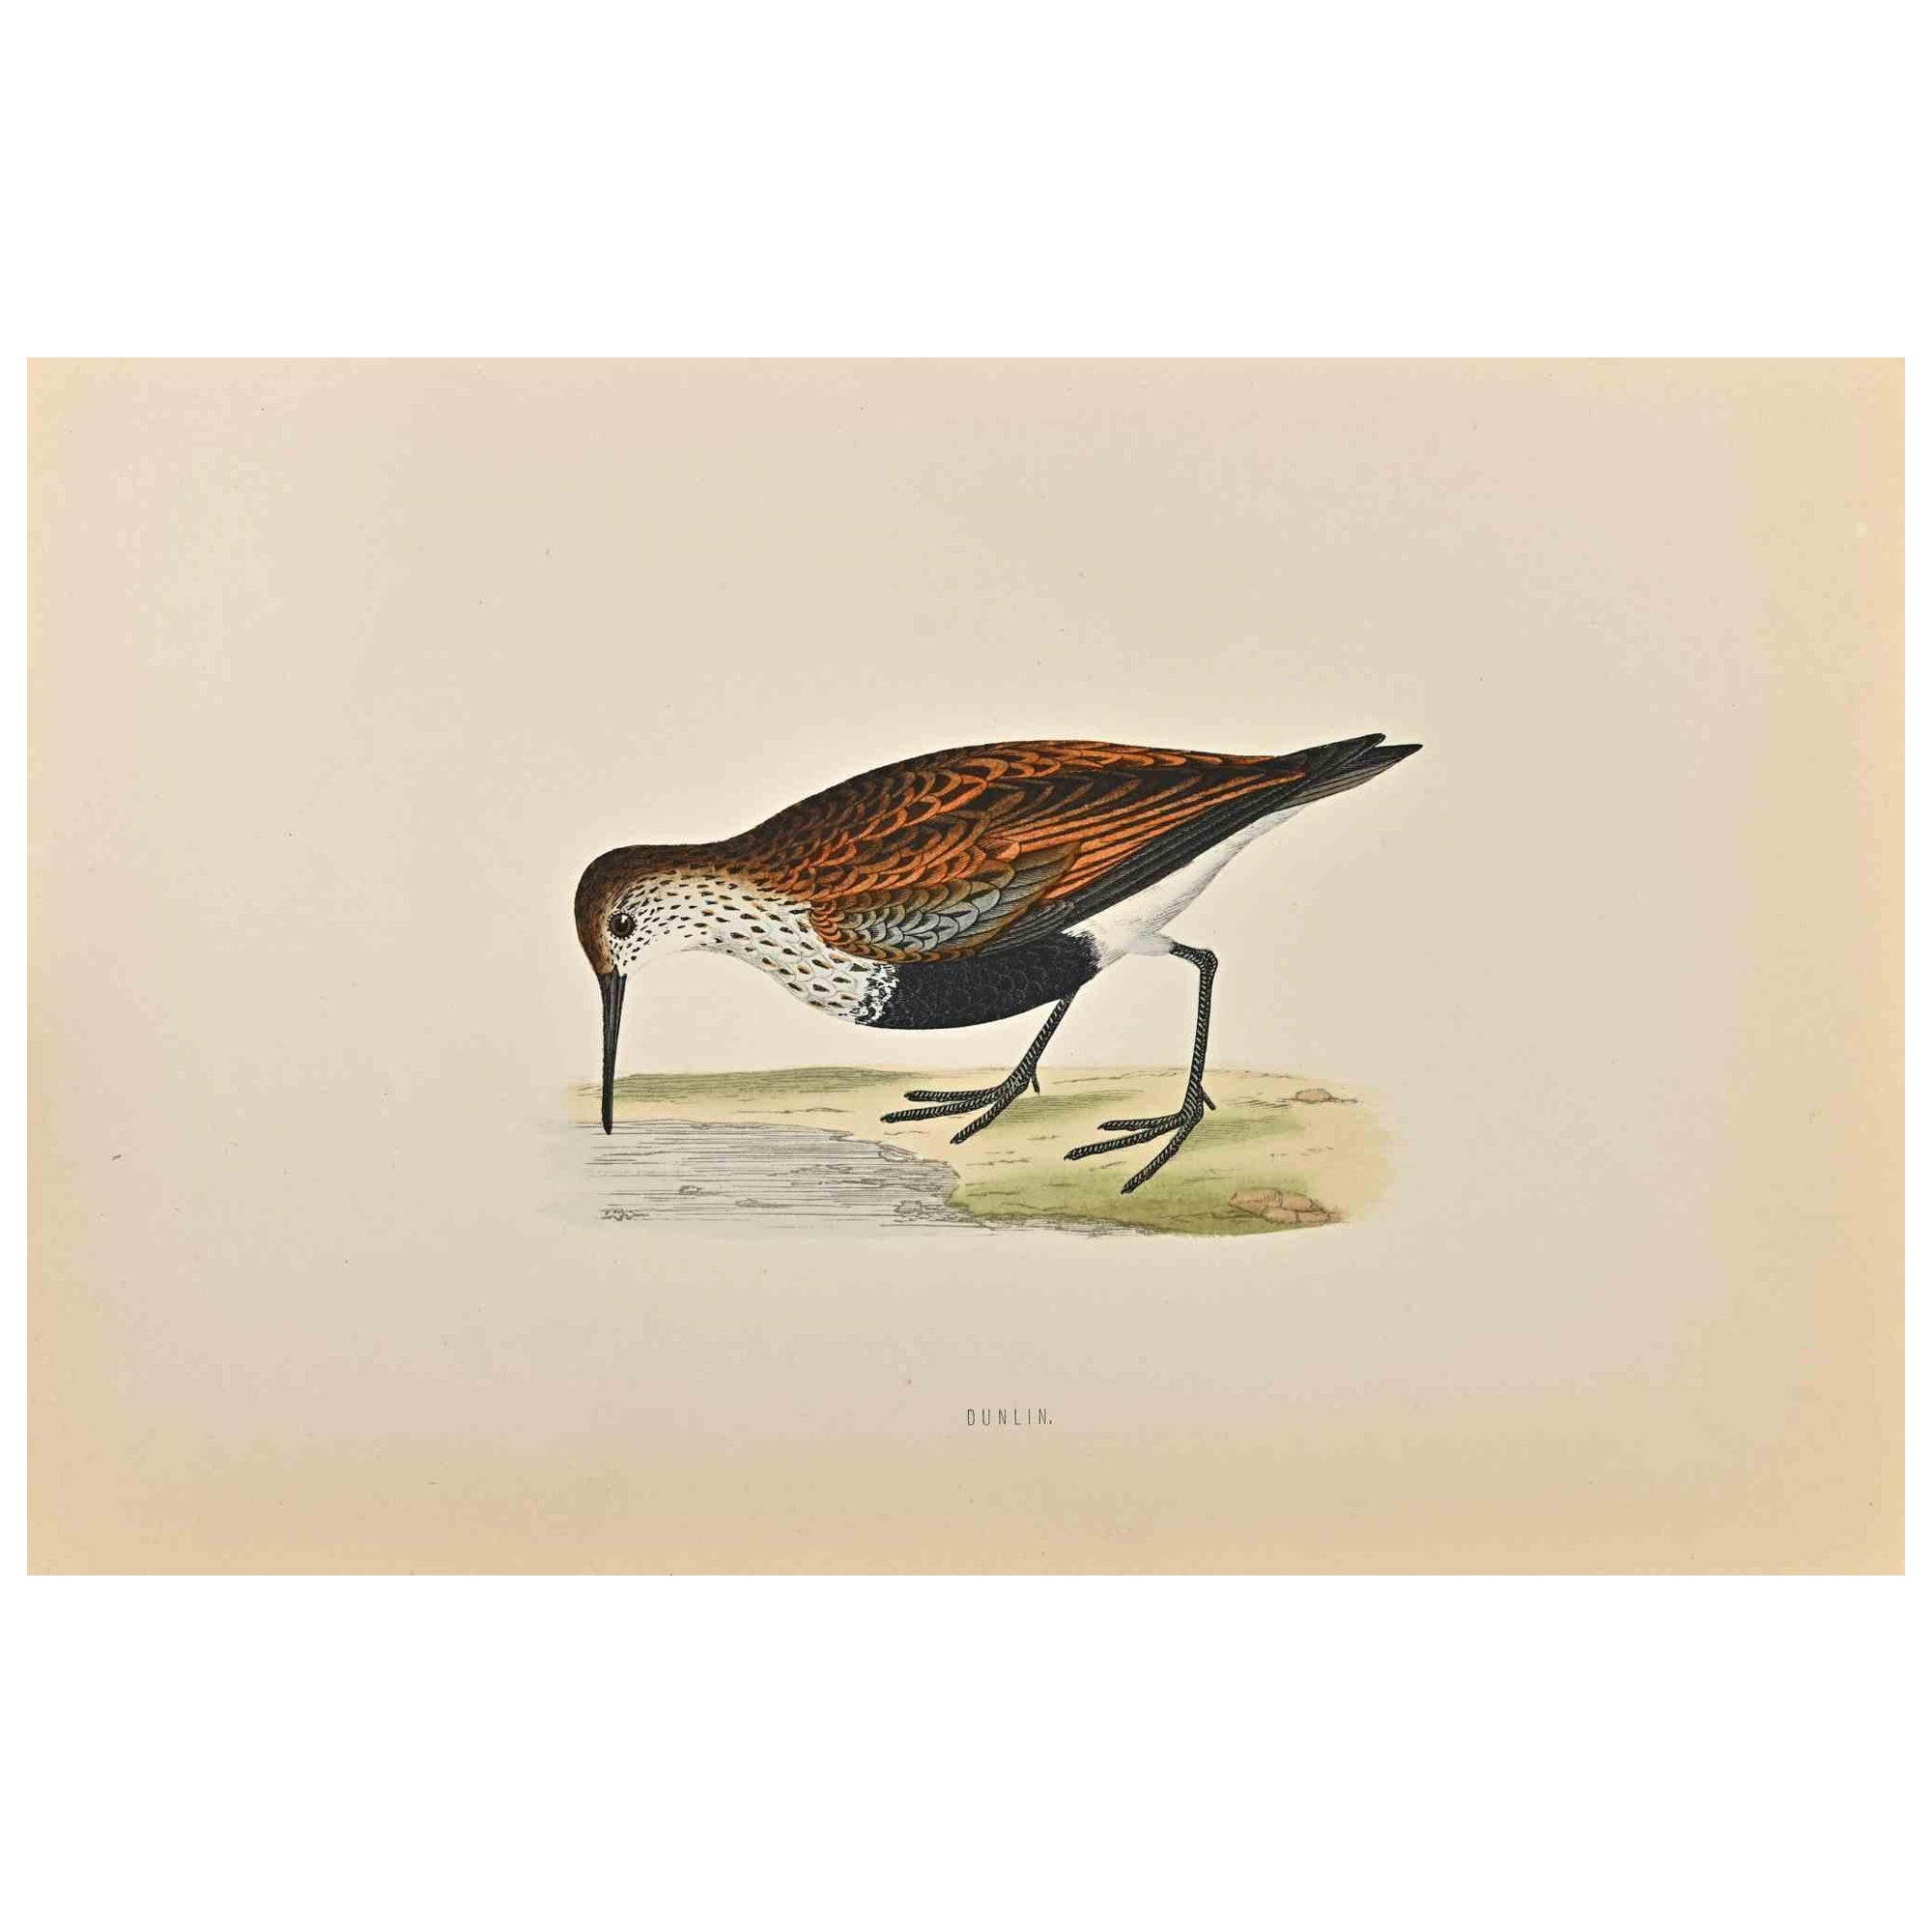 Dunlin is a modern artwork realized in 1870 by the British artist Alexander Francis Lydon (1836-1917).

Woodcut print on ivory-colored paper.

Hand-colored, published by London, Bell & Sons, 1870.  

The name of the bird is printed on the plate.